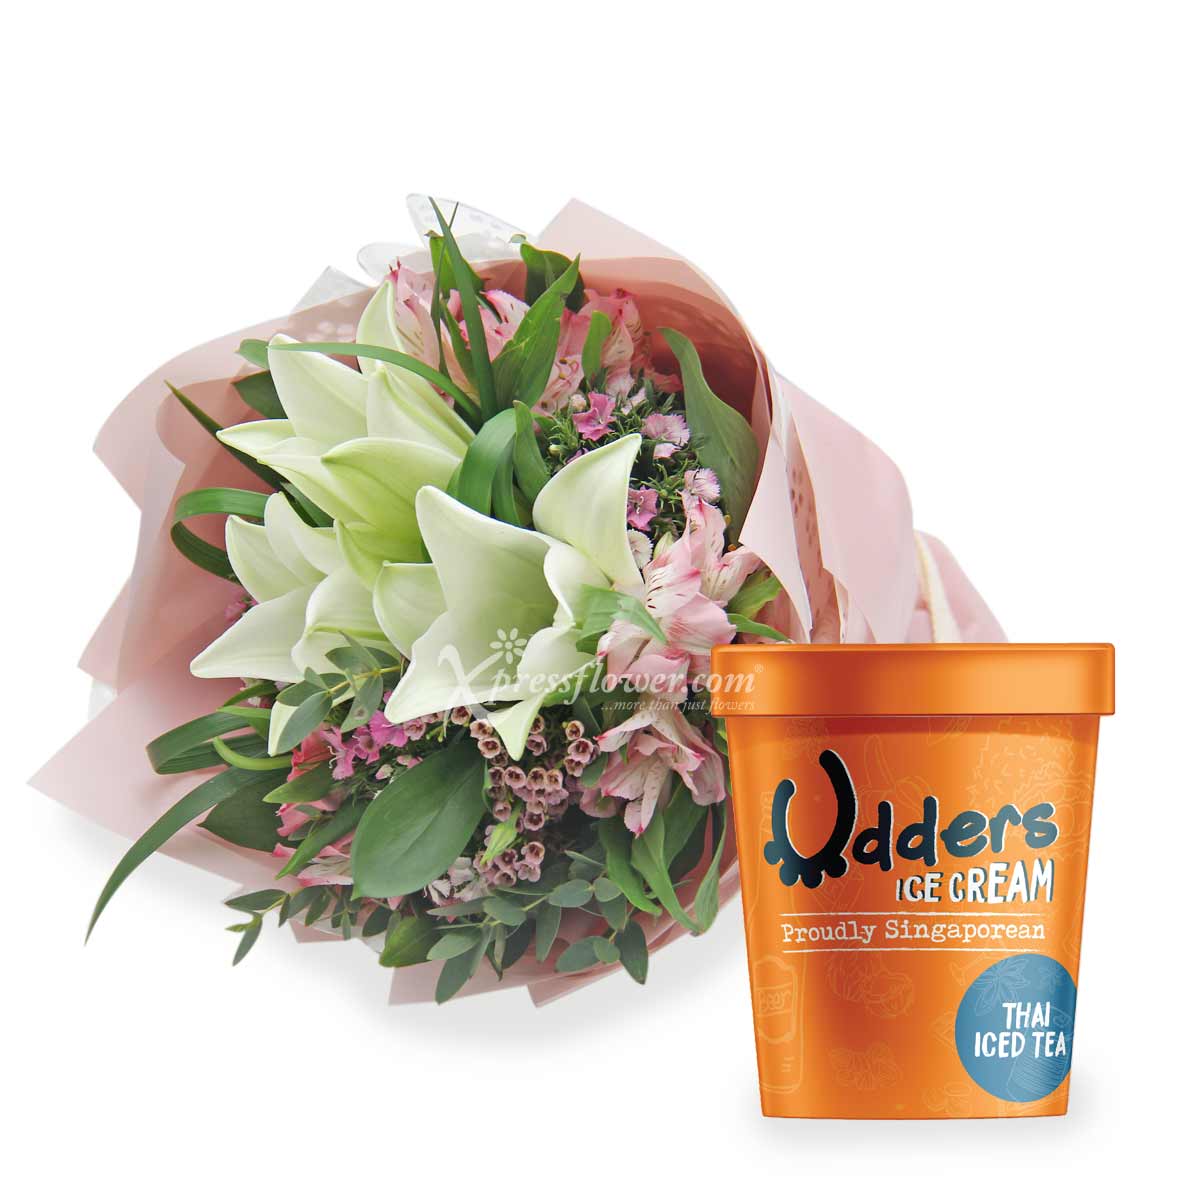 UD2003 Snow Queen udders with flower